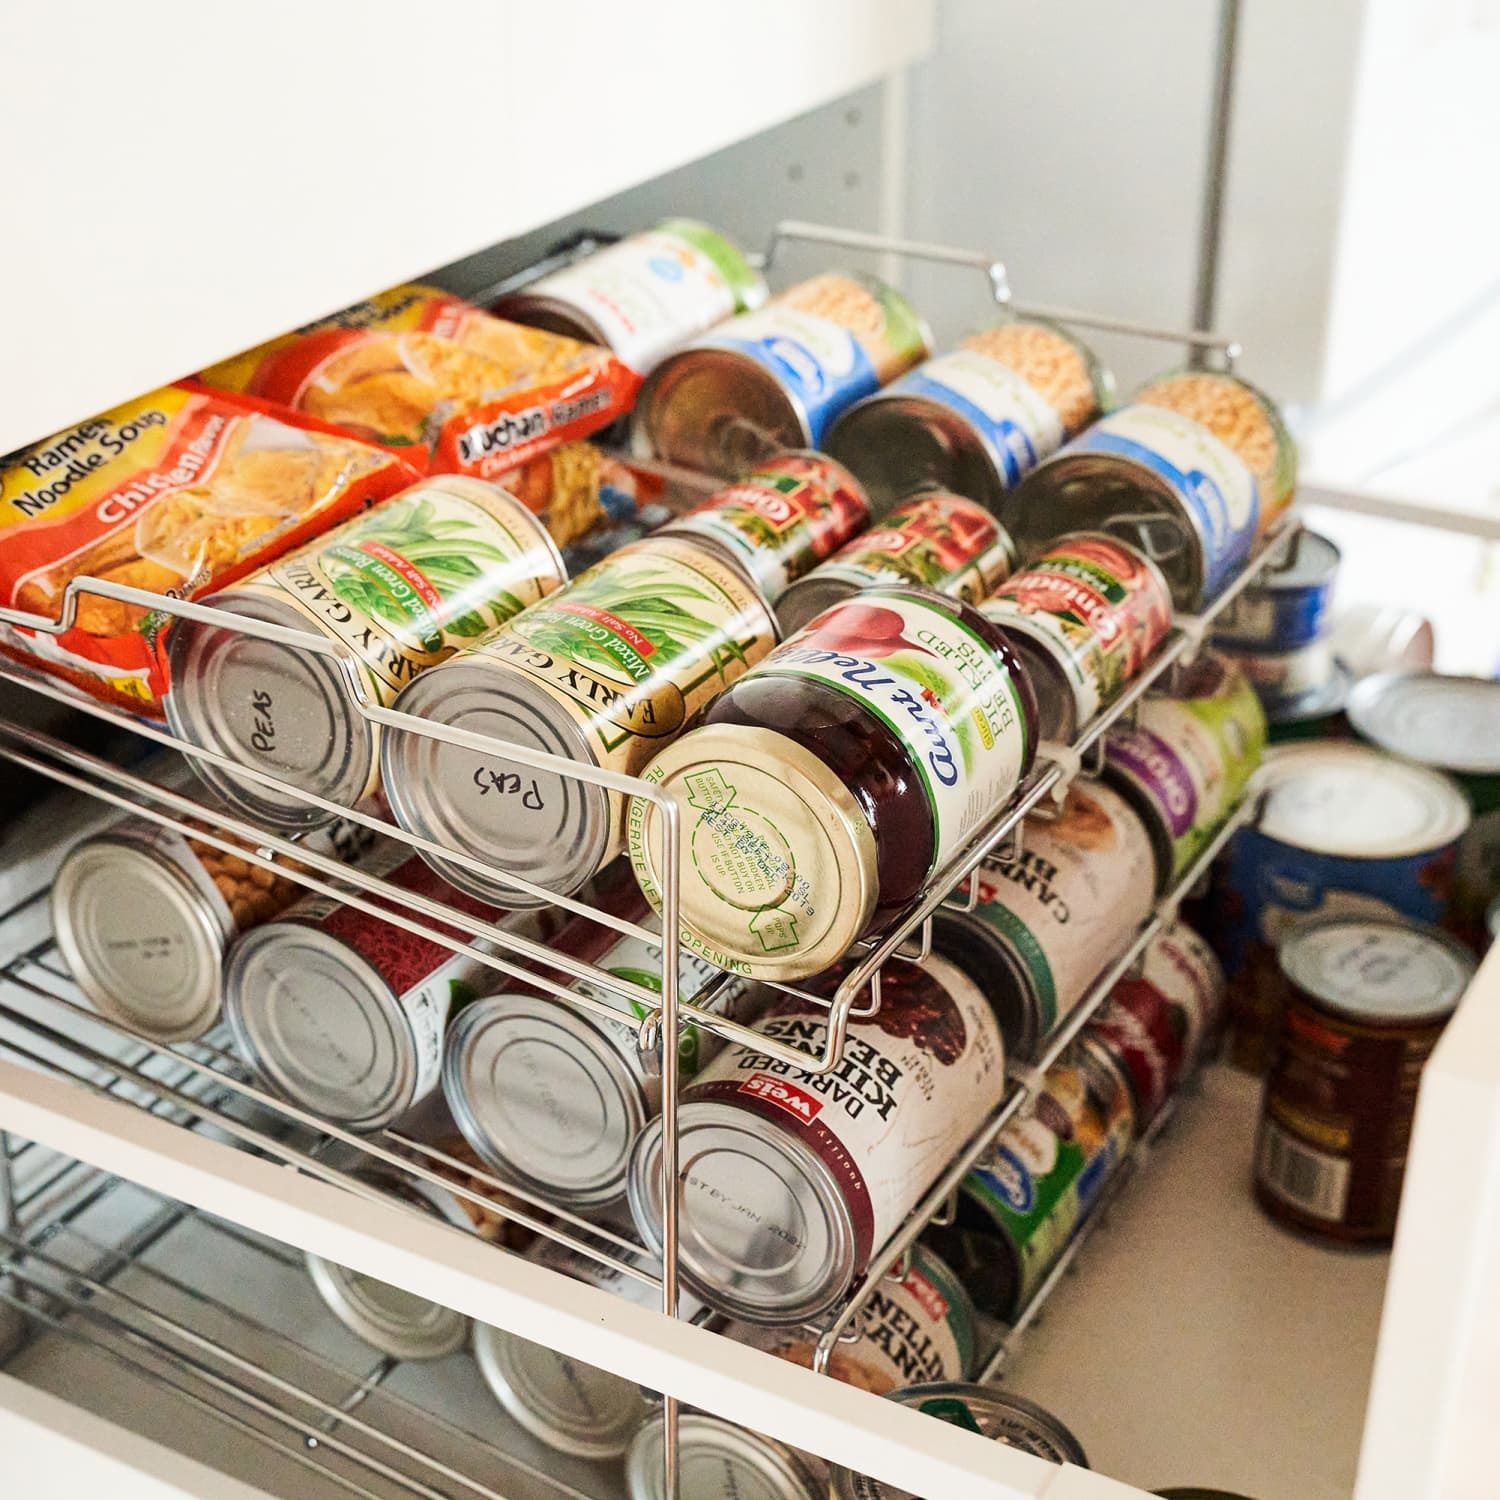 How To Store Canned Goods